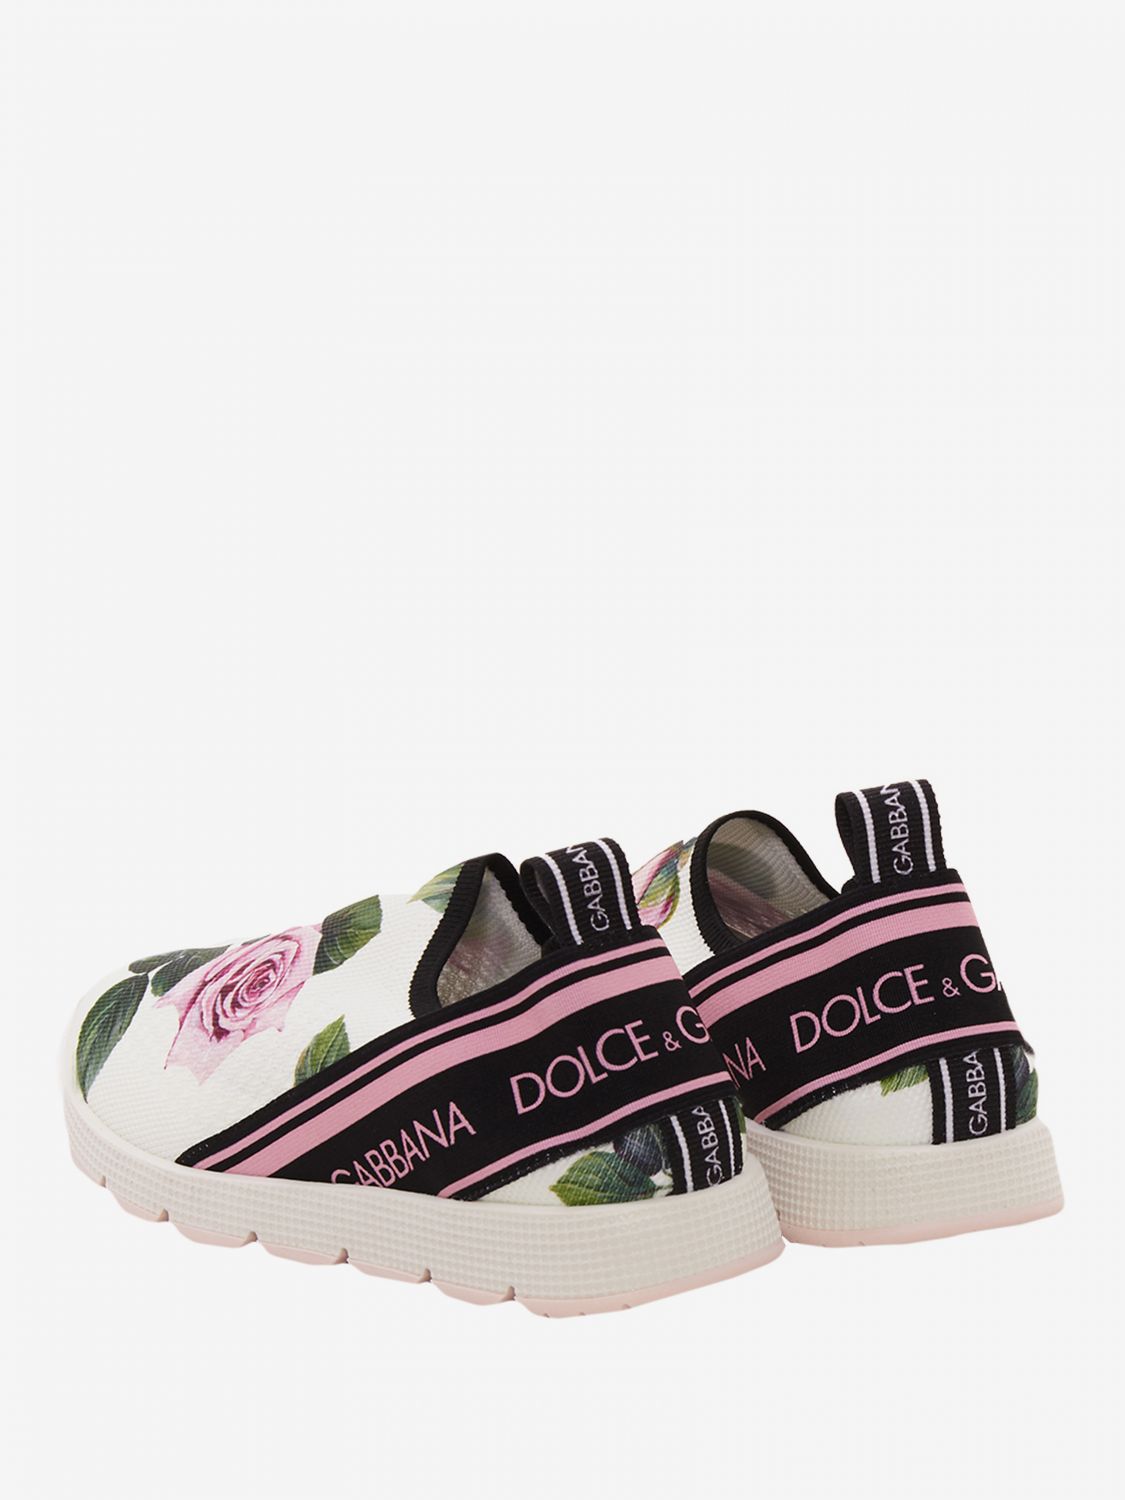 dolce and gabbana infant shoes